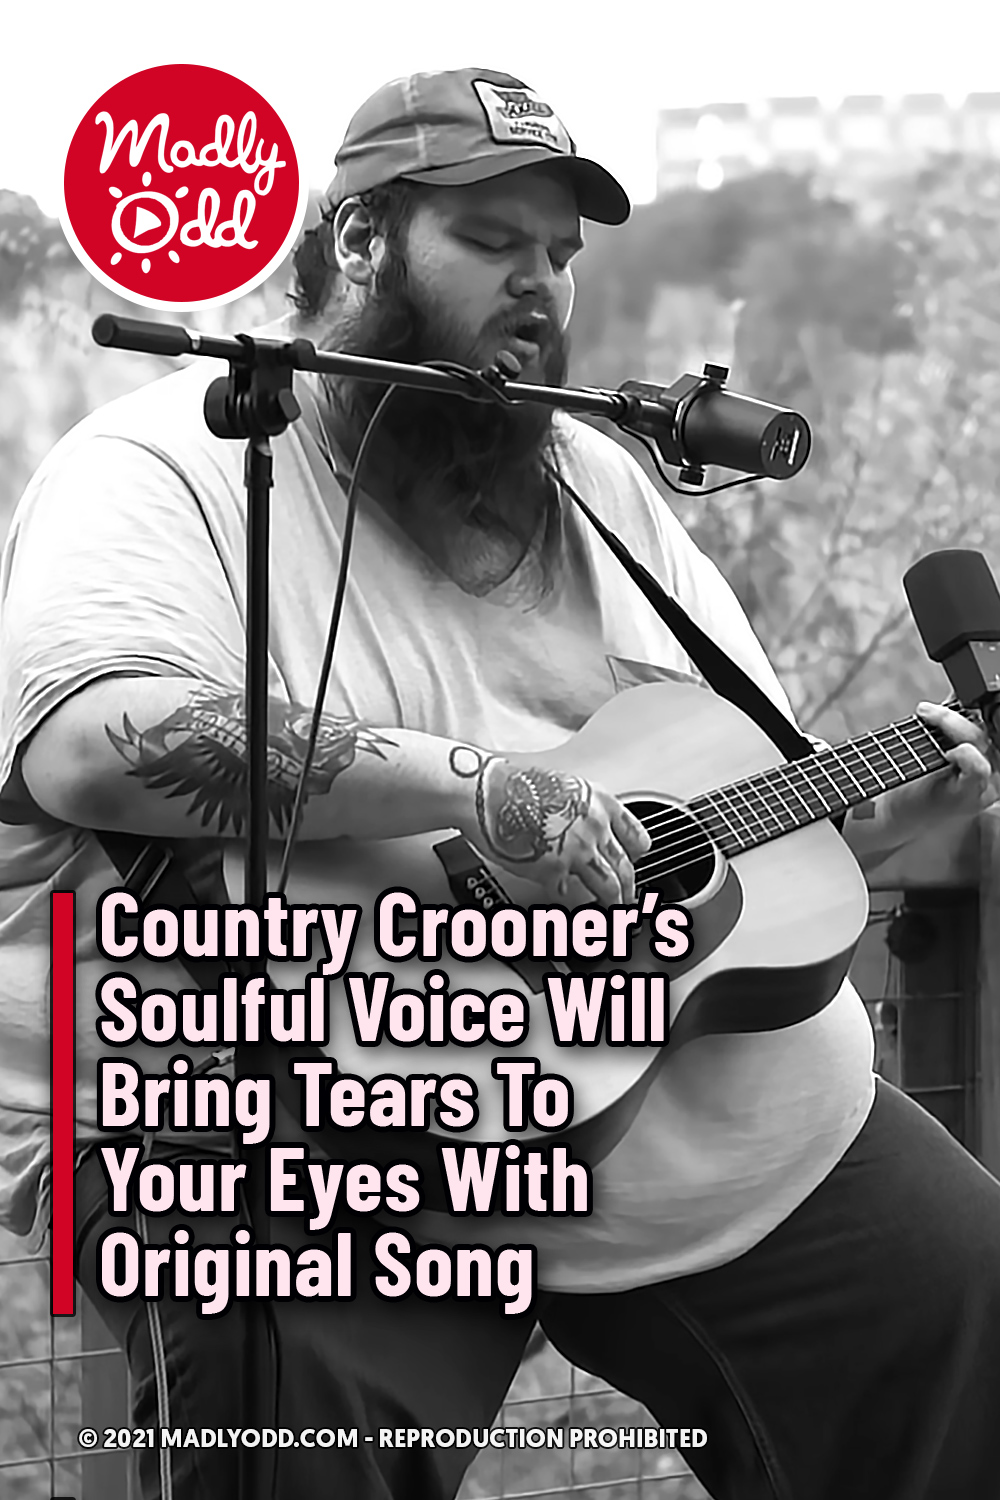 Country Crooner’s Soulful Voice Will Bring Tears To Your Eyes With Original Song